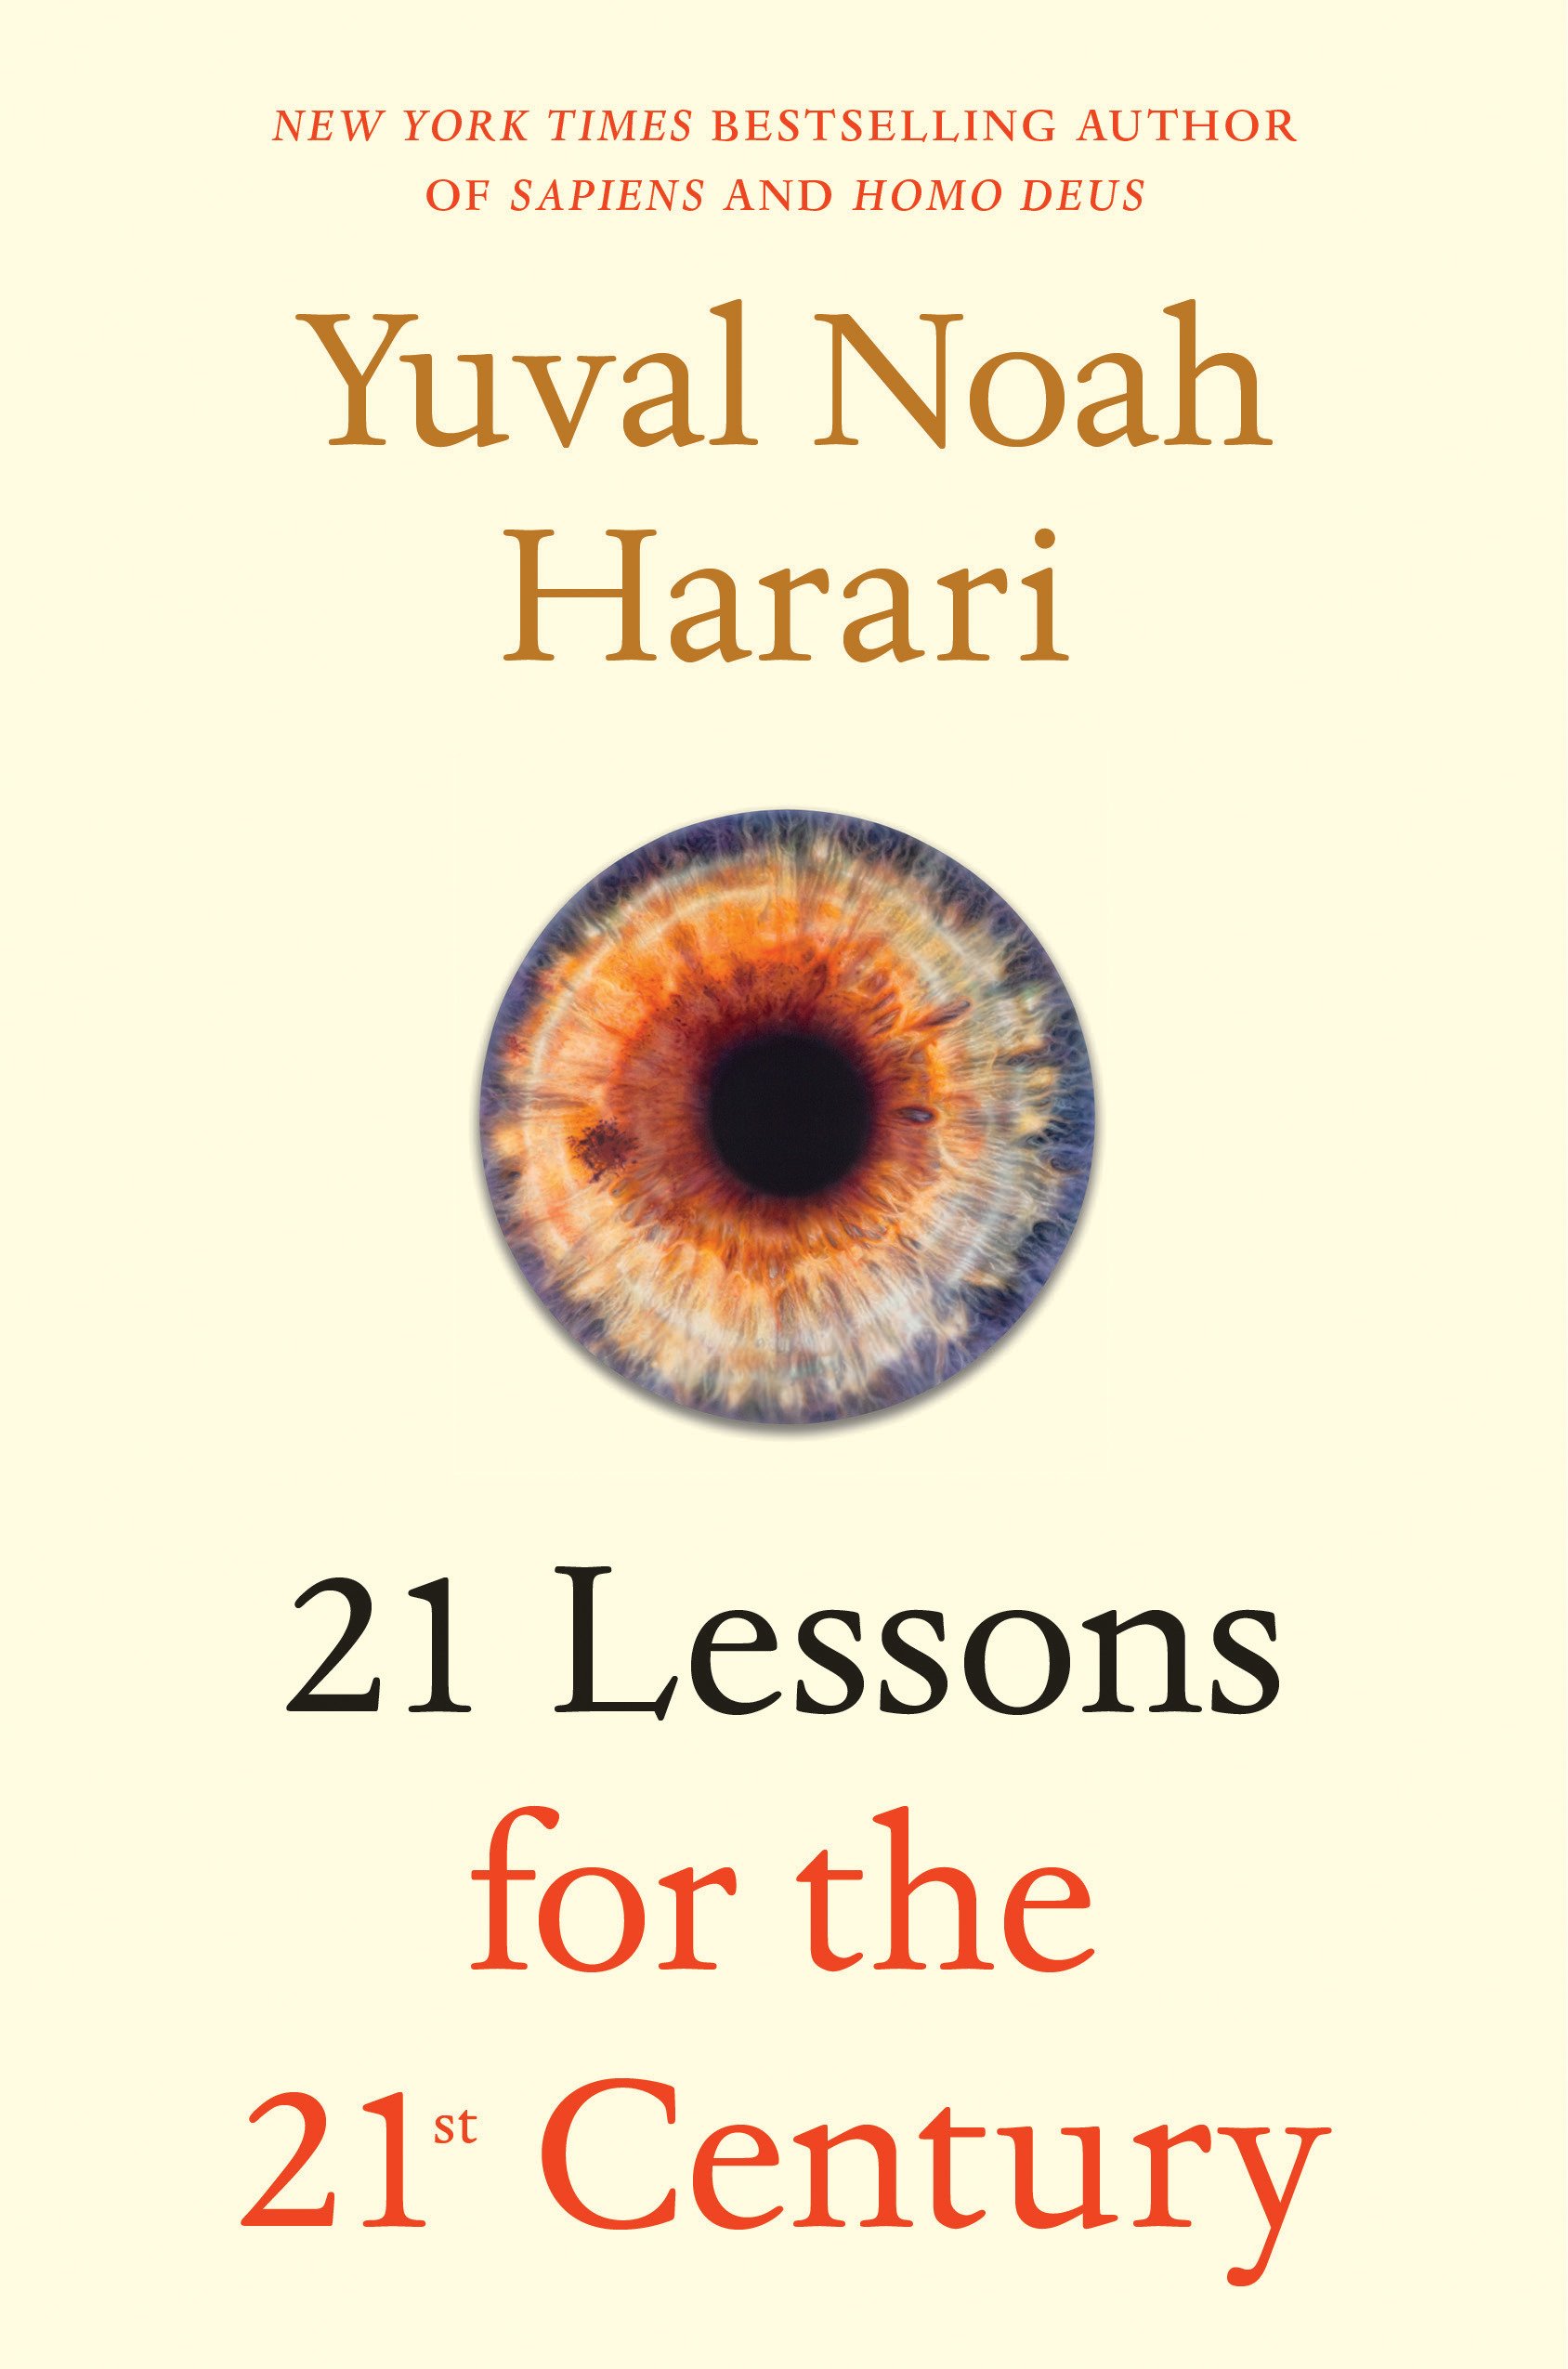 21 Lessons for the 21st Century | Yuval Noah Harari